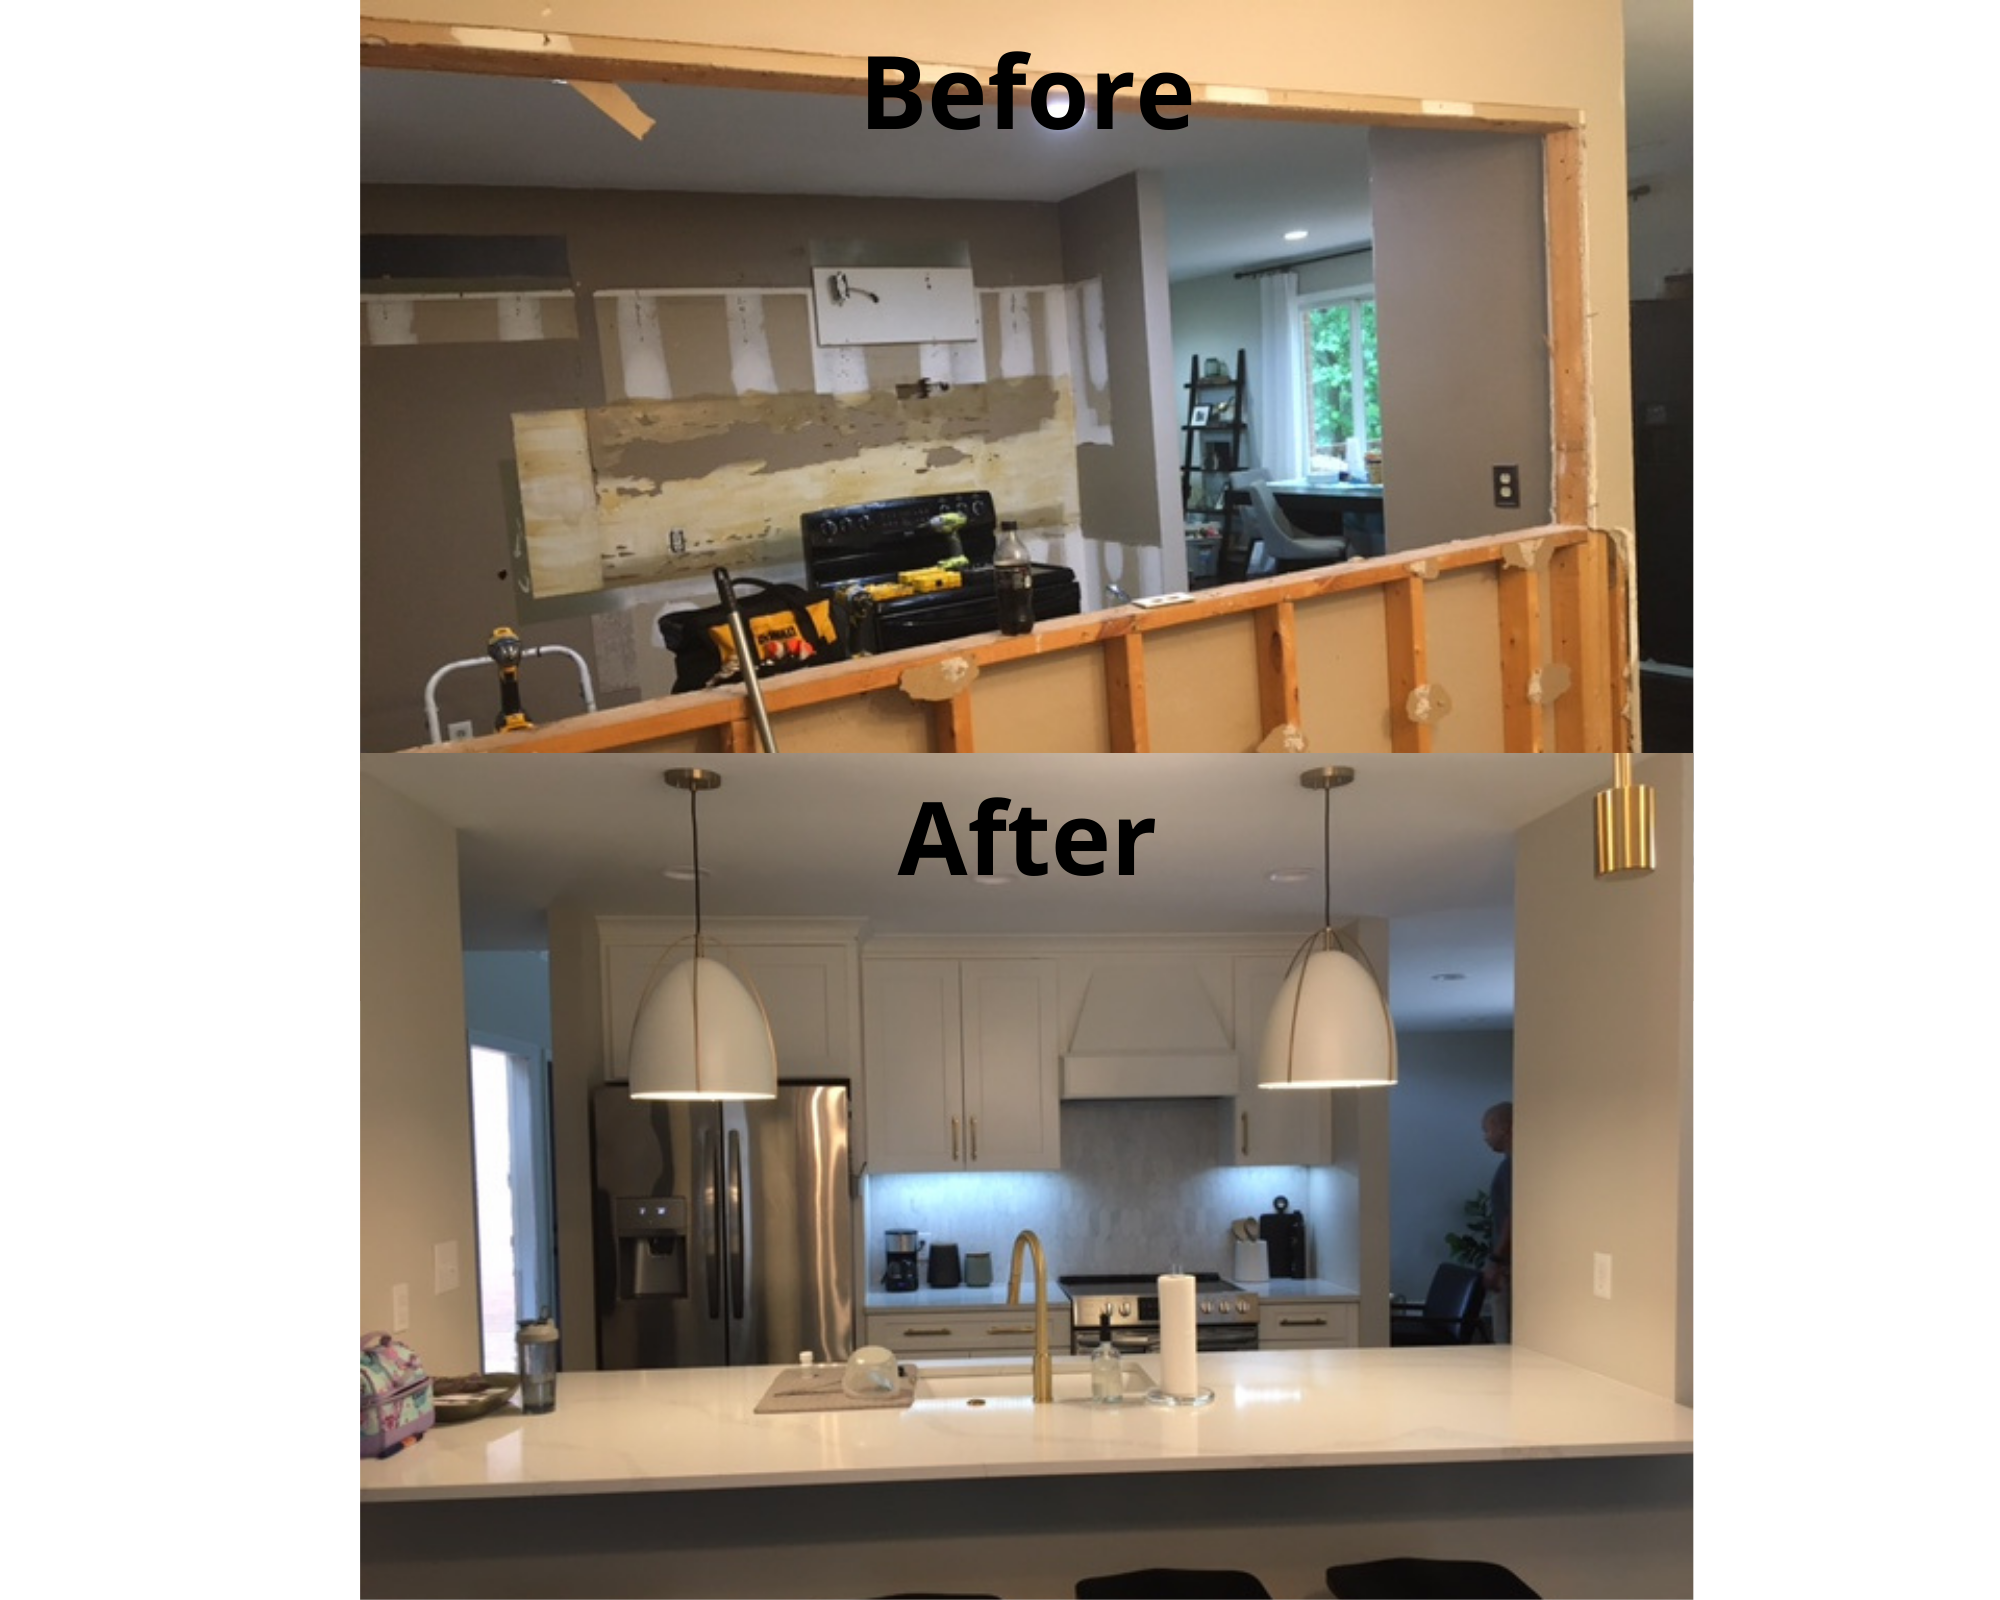 Kitchen renovations Strothmann Fine Cabinetry Anderson (864)824-3040